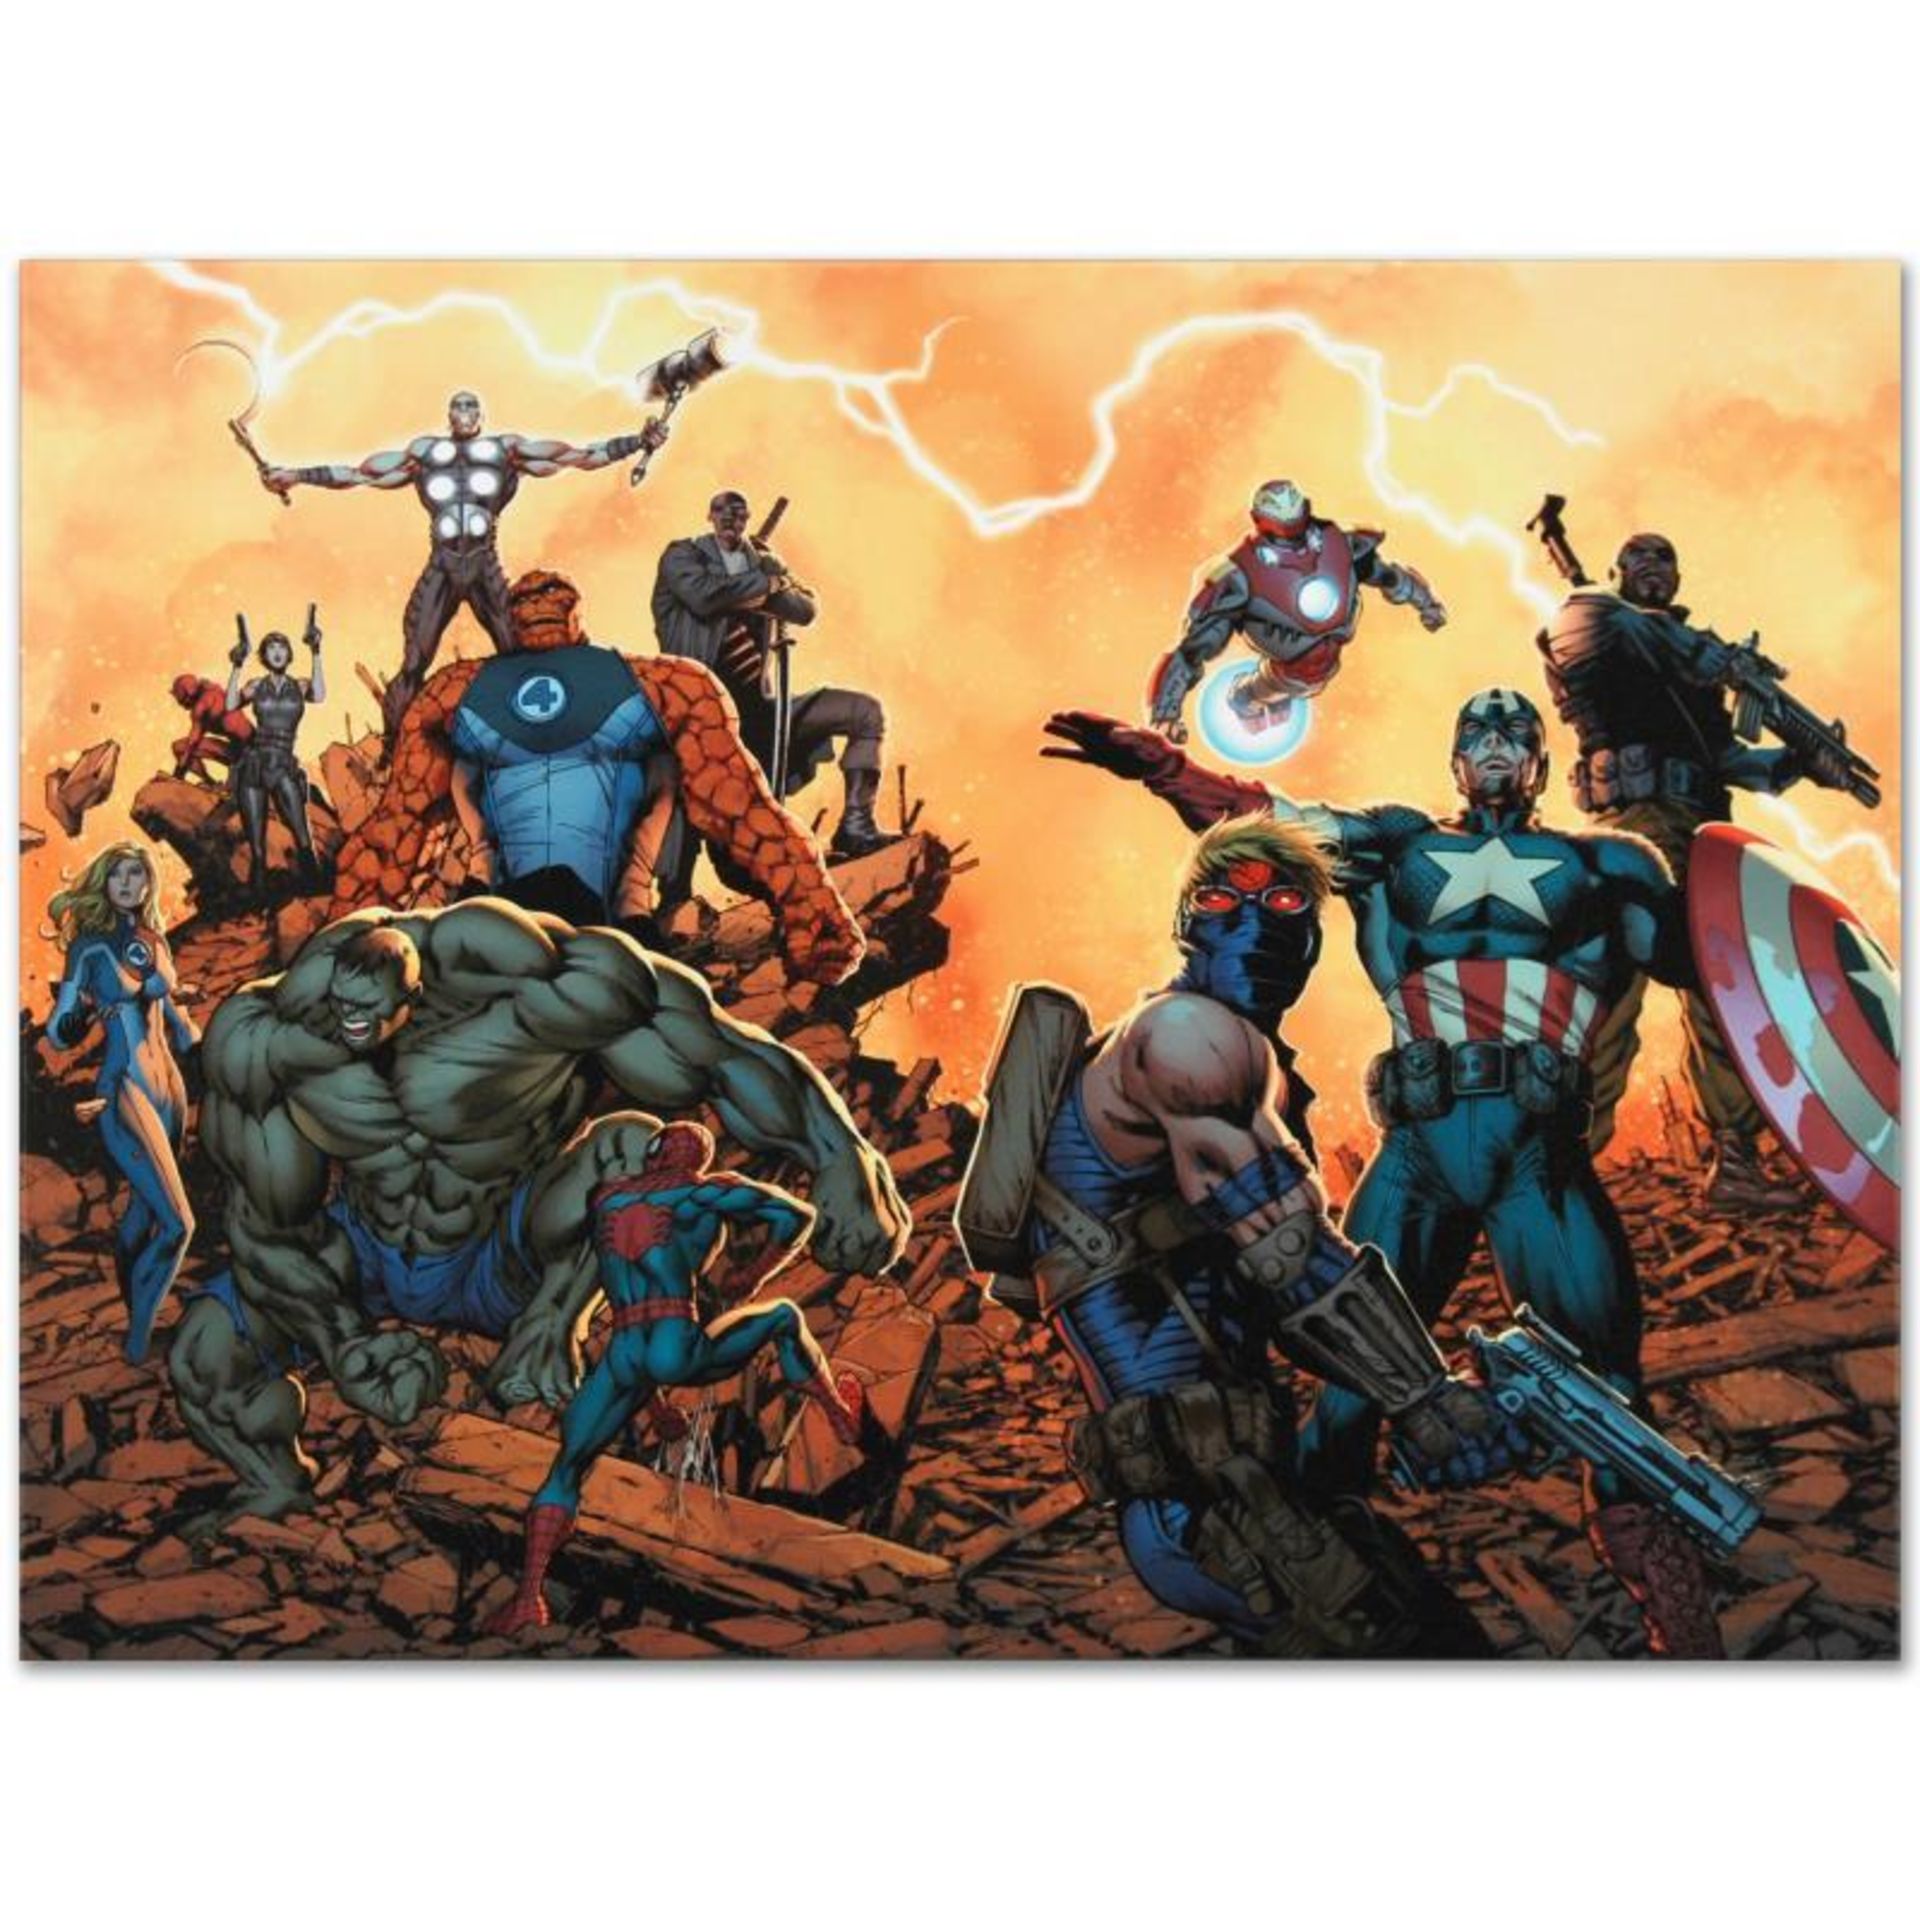 Marvel Comics "Ultimate Comics: Avengers #1" Numbered Limited Edition Giclee on